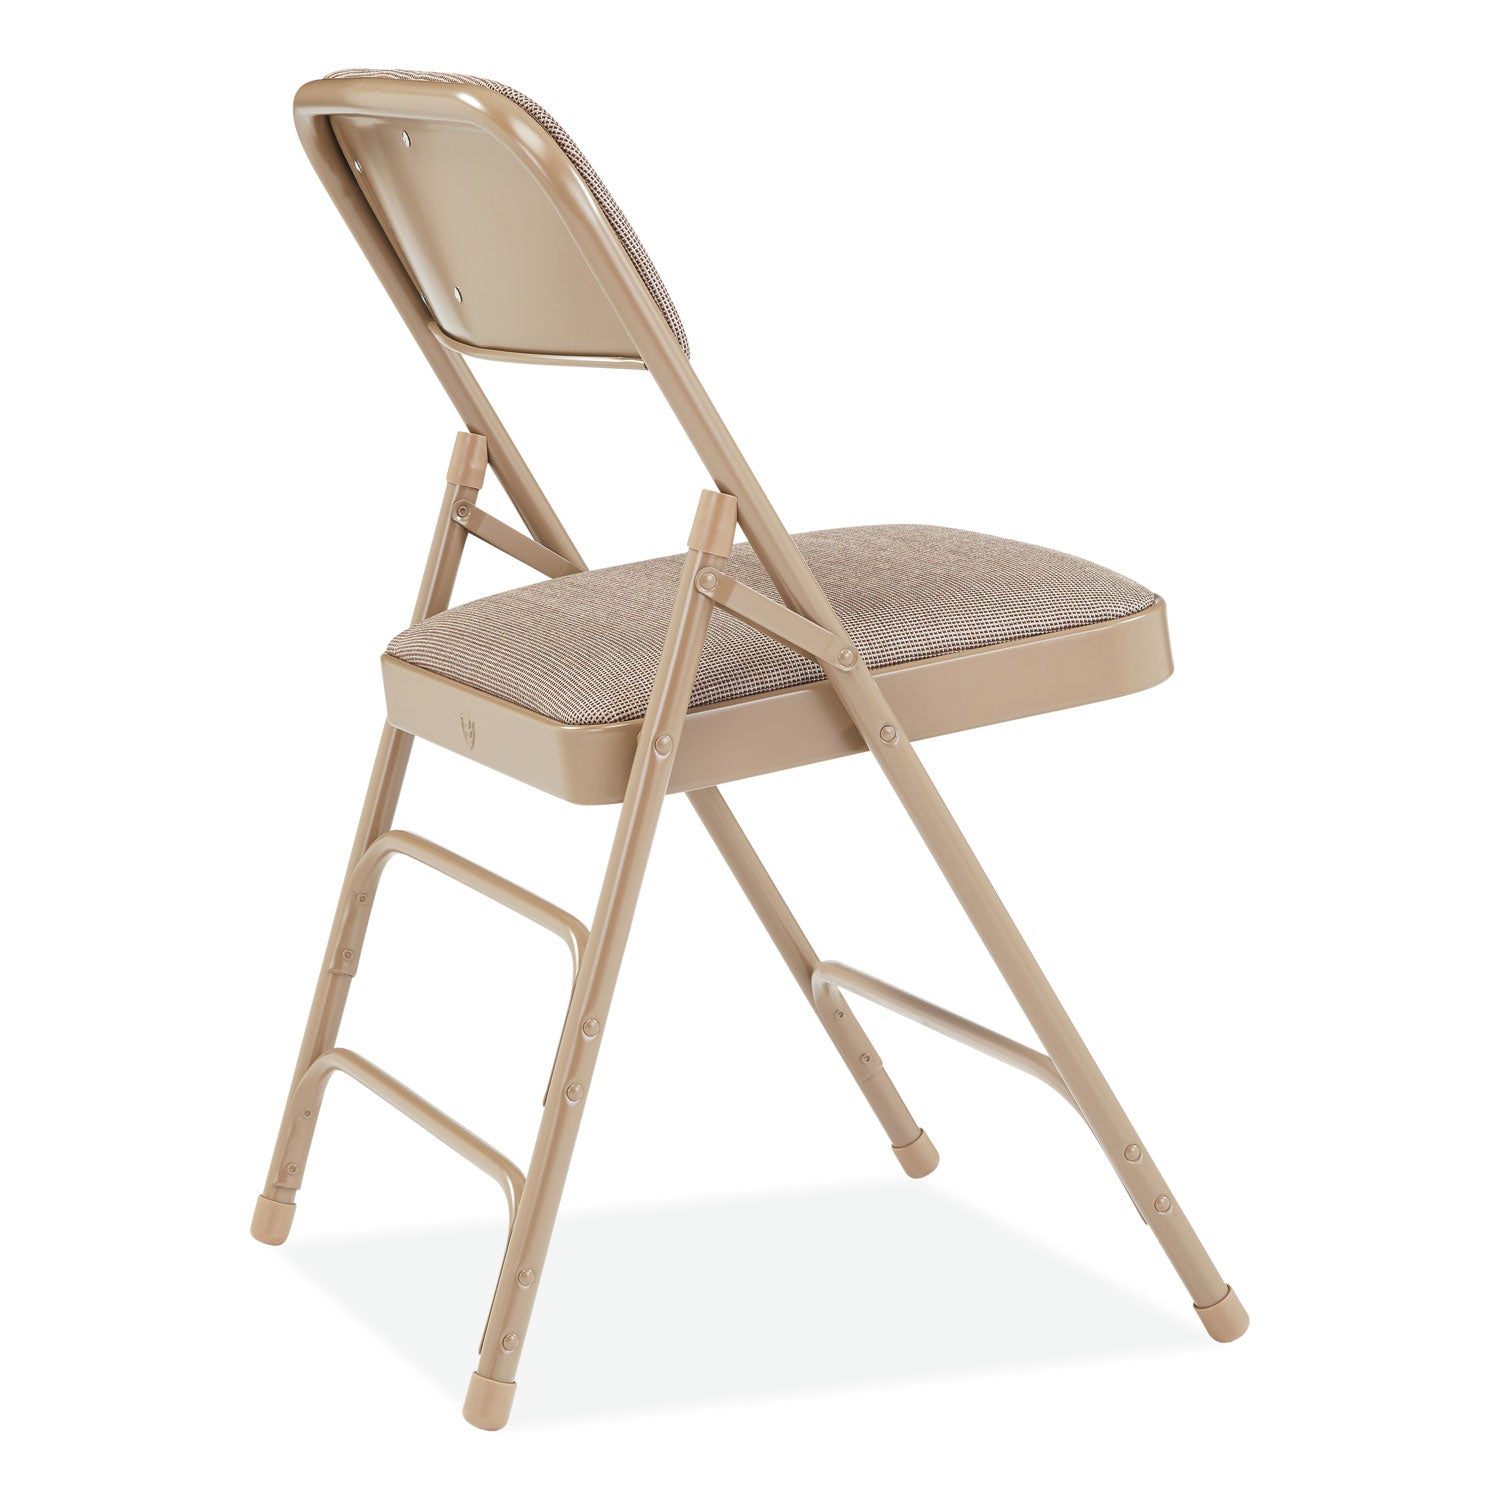 2300-series-fabric-triple-brace-double-hinge-premium-folding-chair-supports-500-lb-cafe-beige-4-ct-ships-in-1-3-bus-days_nps2301 - 4